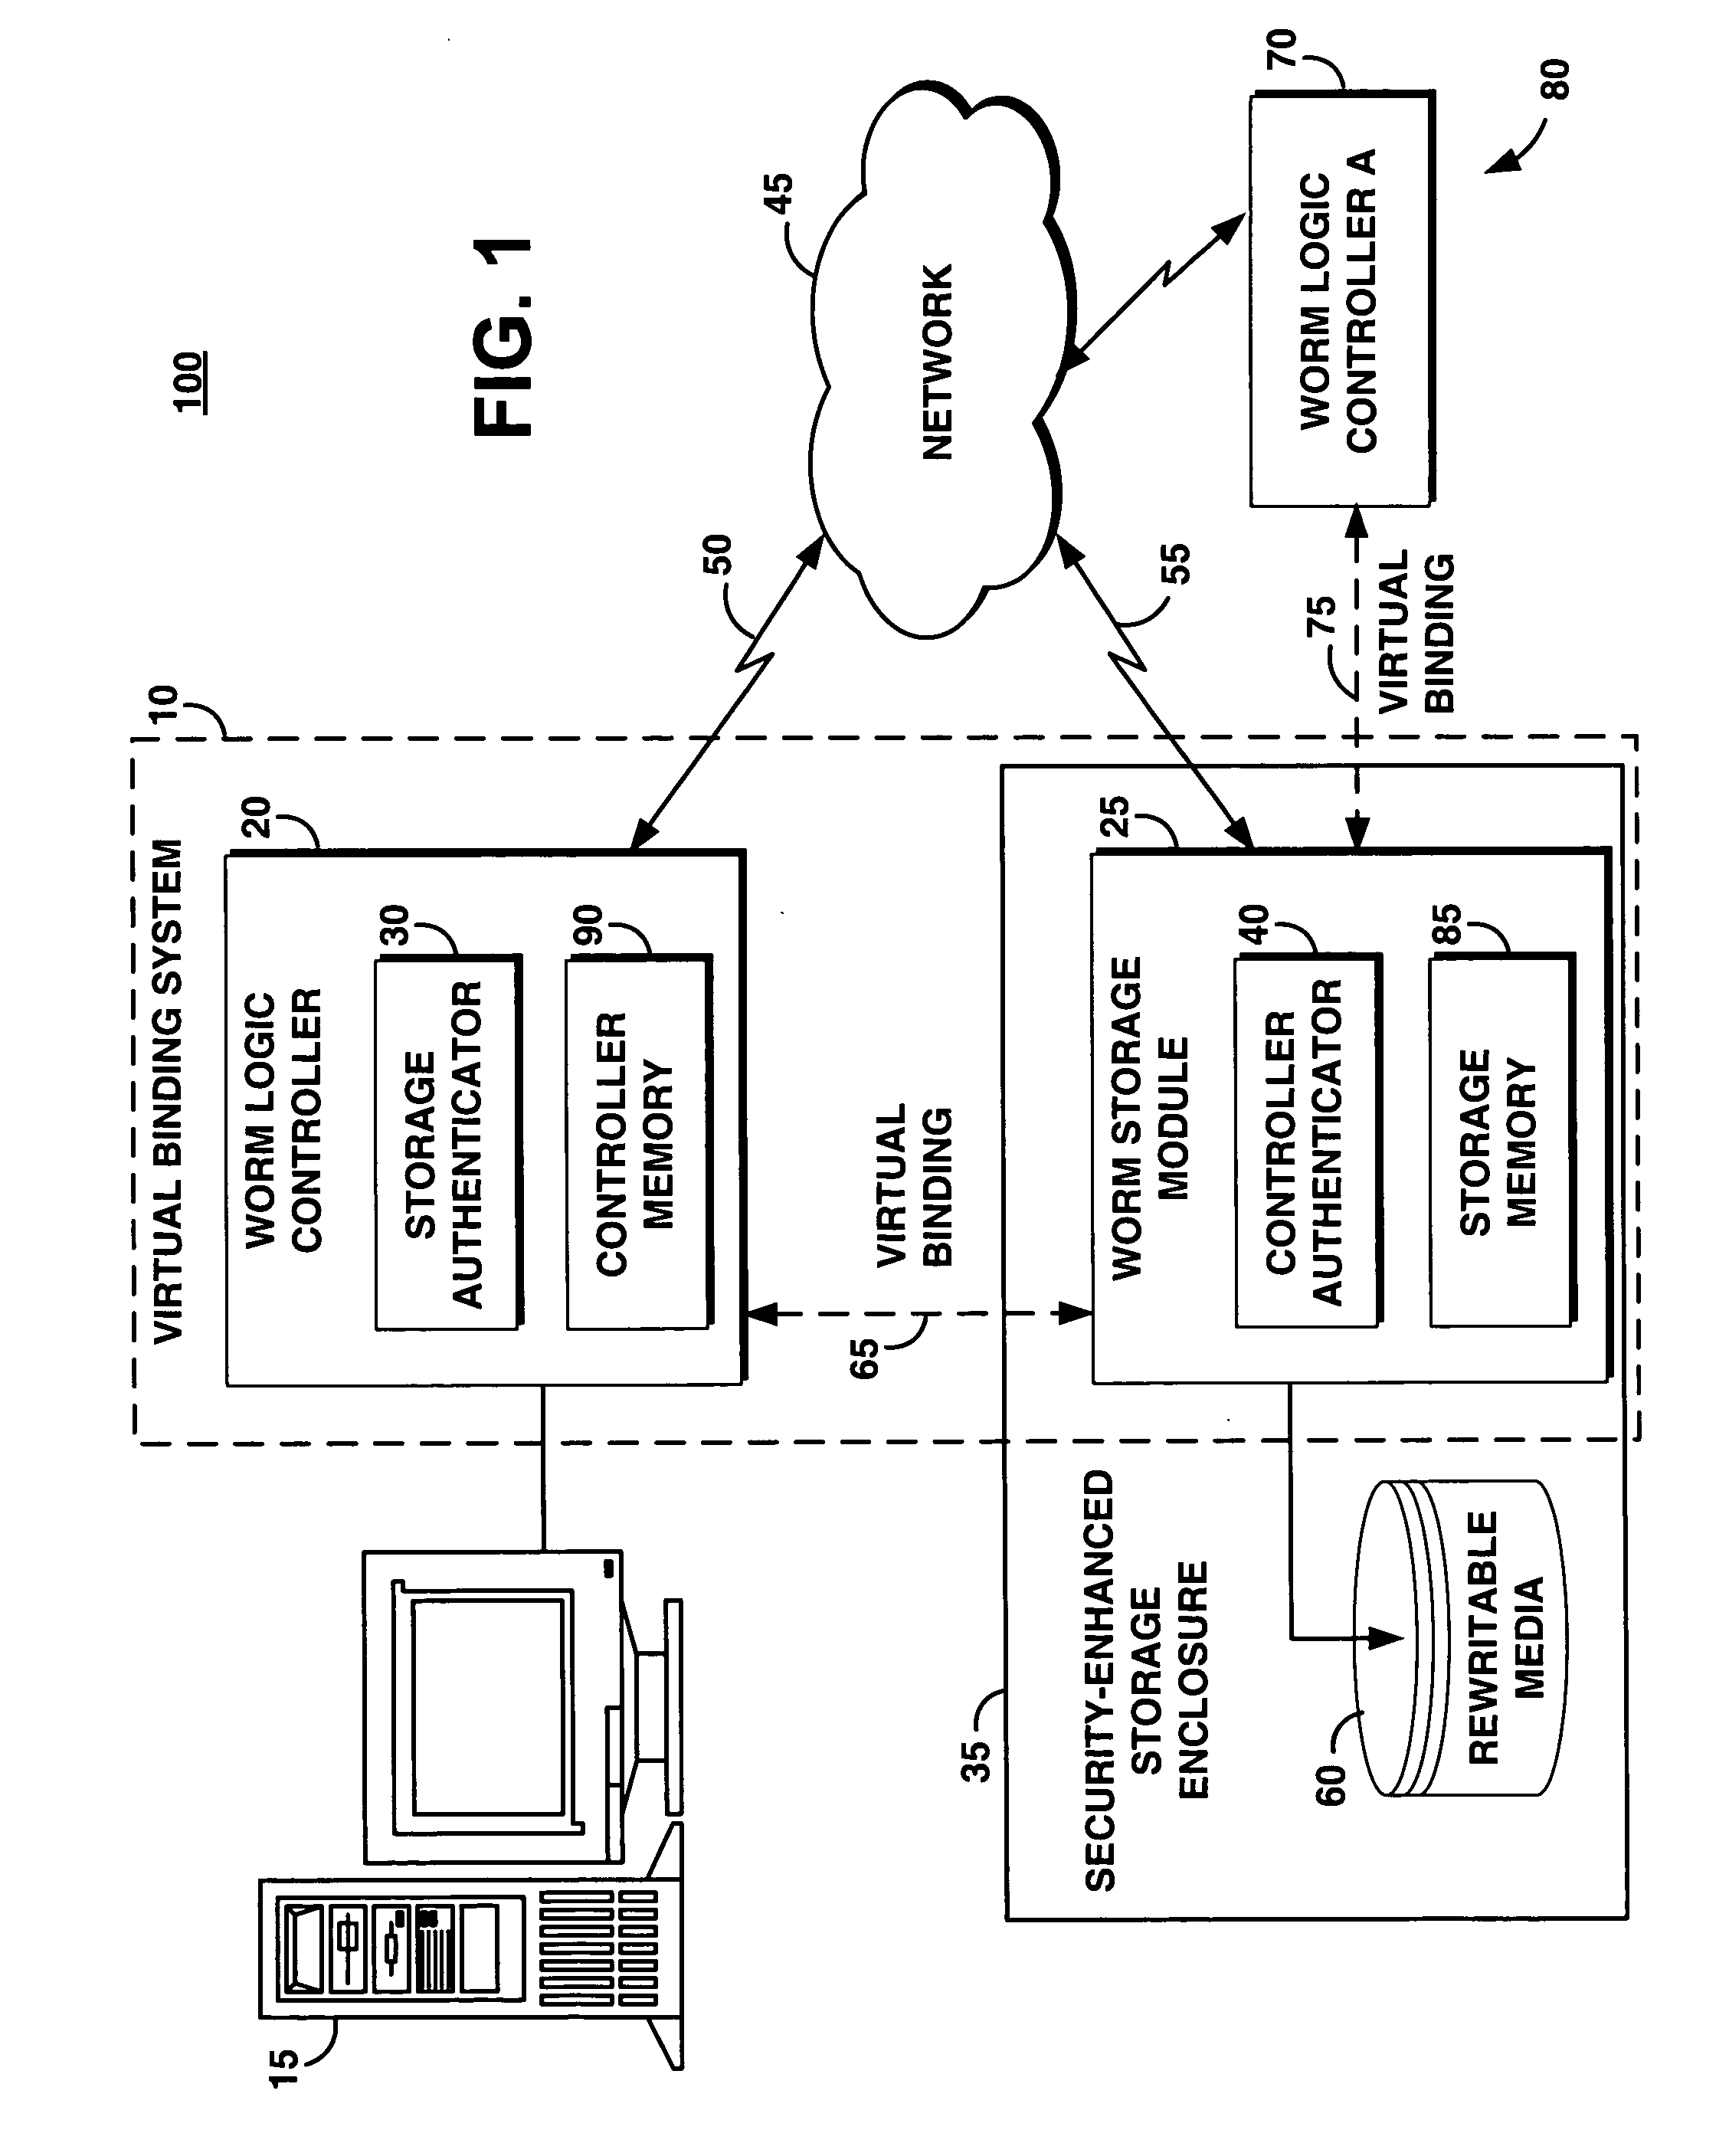 System and method for providing a virtual binding for a worm storage system on rewritable media